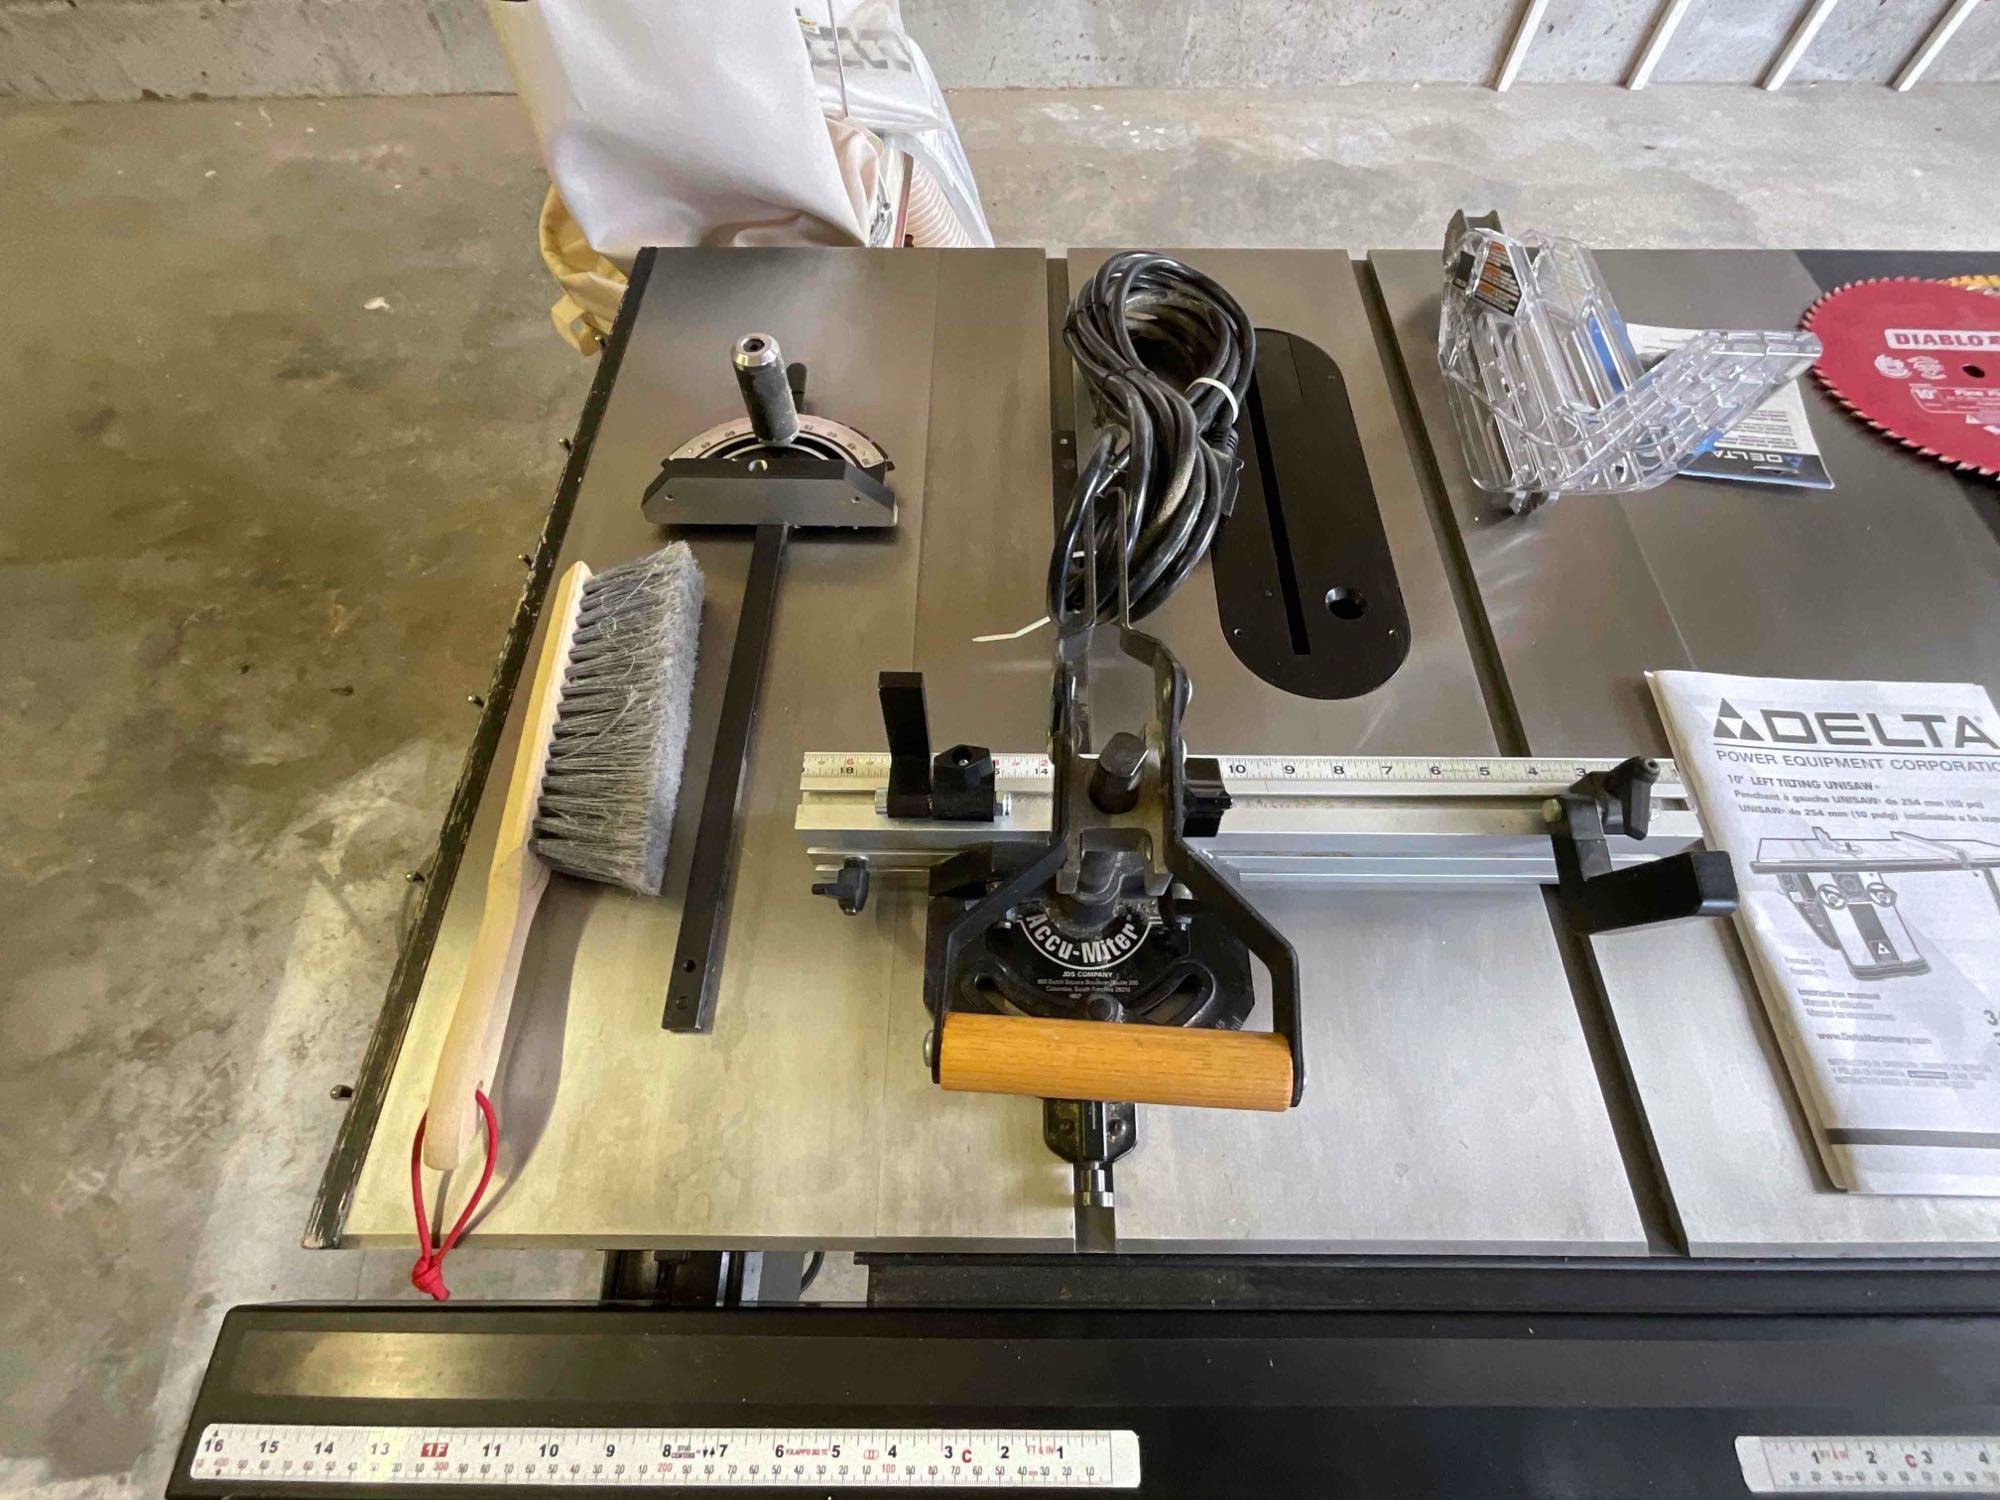 Delta Unisaw 10" 15 amp table saw Model 36-L552 w/ Biesemeyer fence, extrtas & Jet Dust collector